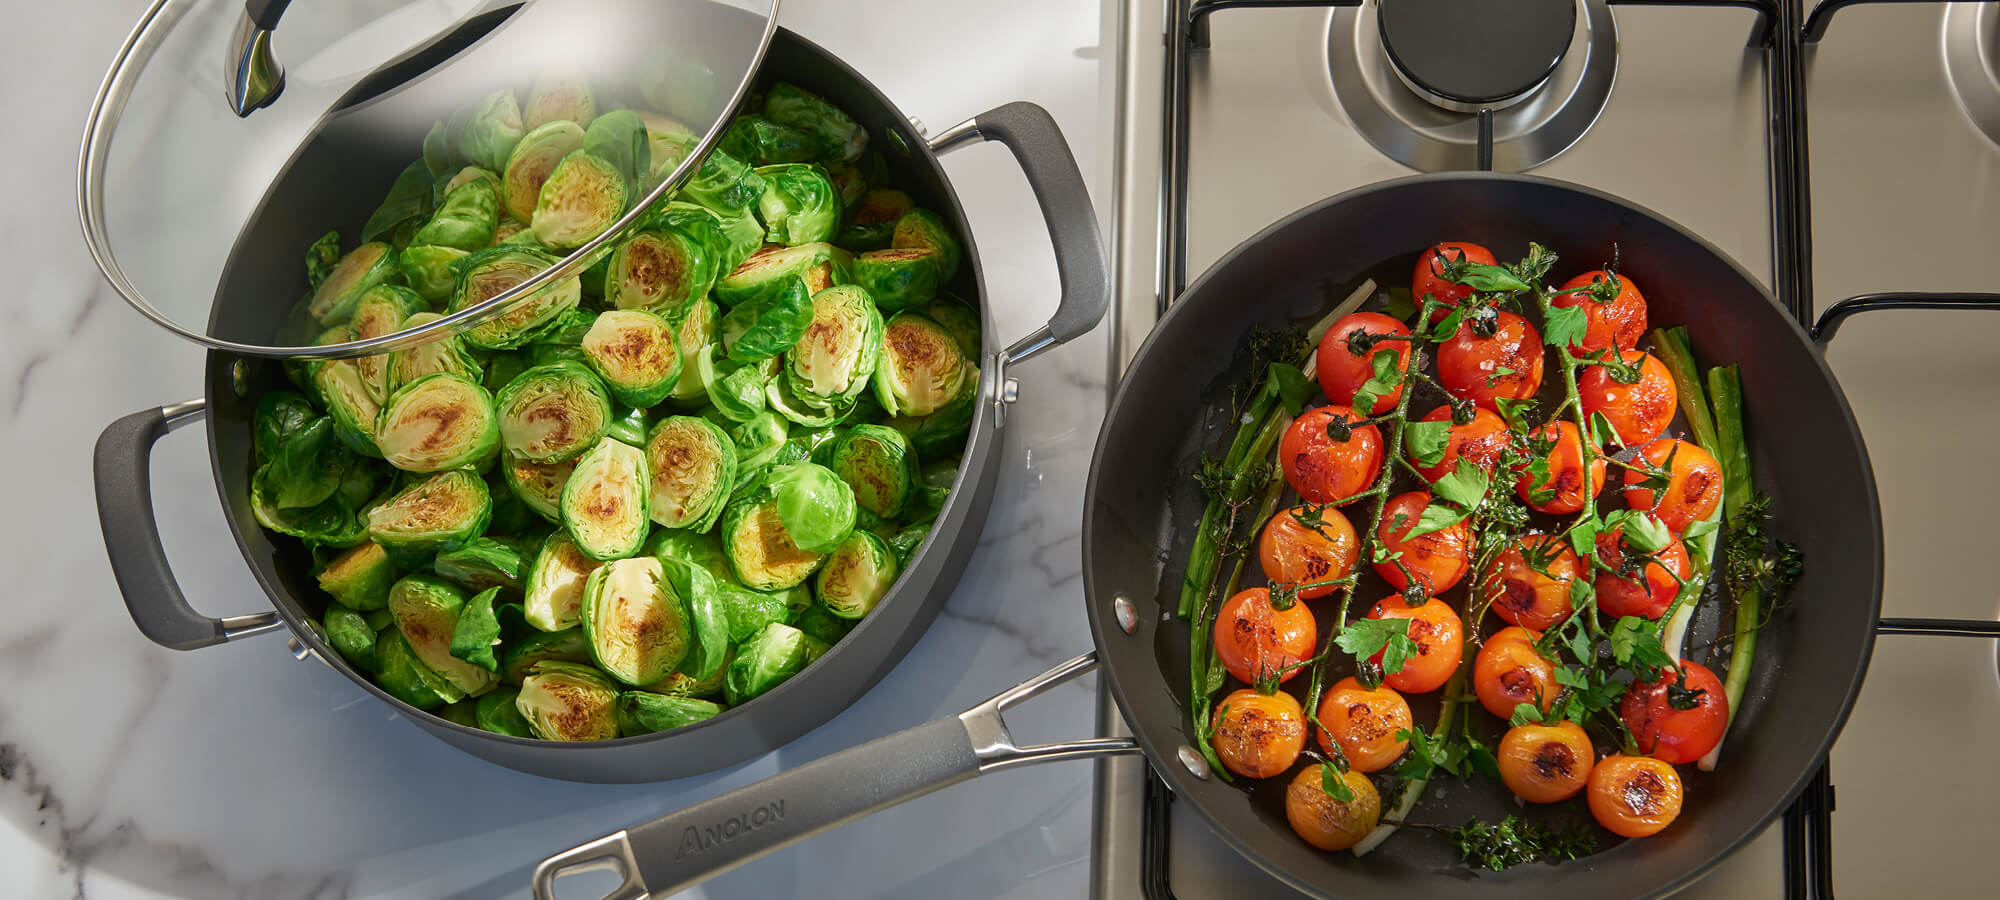 Australia’s leading cookware manufacturer Meyer cooking tomatoes and brussel sprouts in Anolon pans